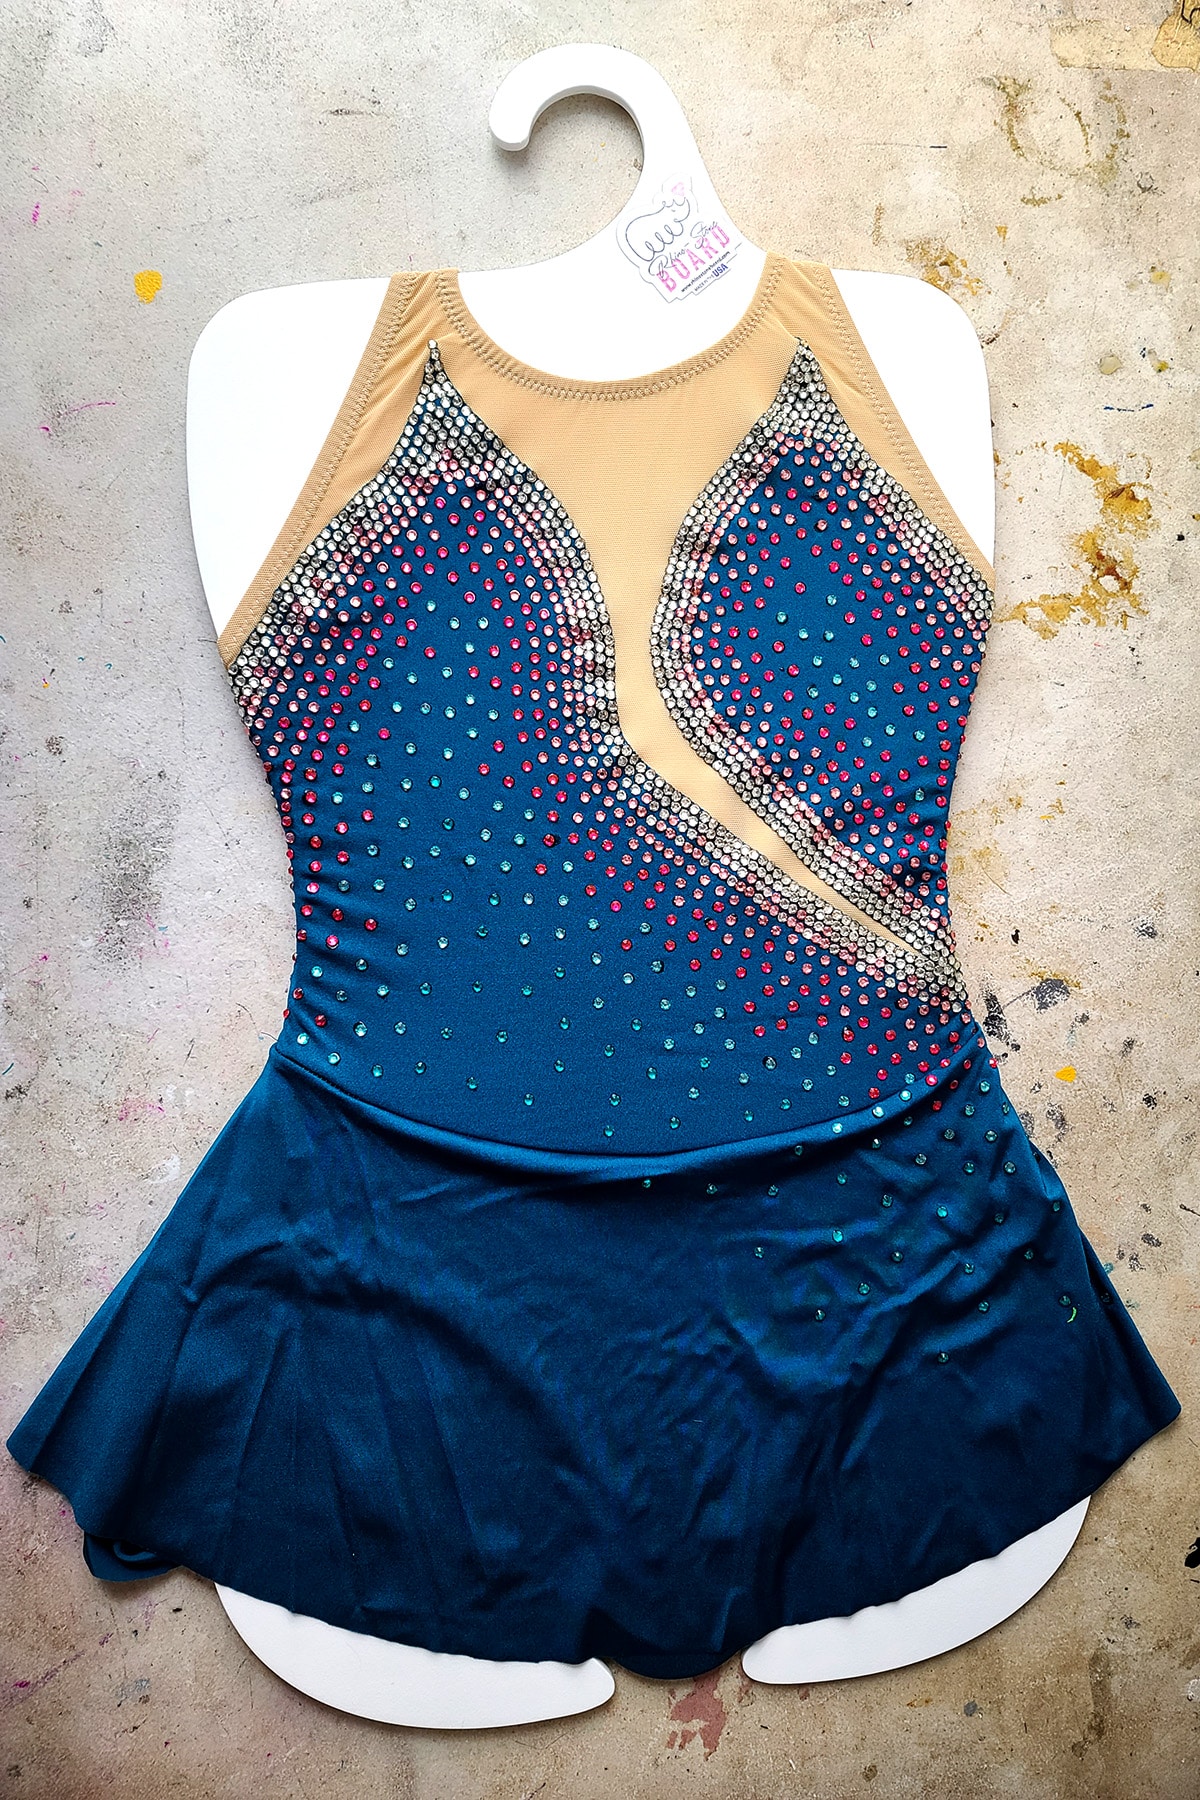 A dark teal skating dress with multicoloured crystals is stretched on a Rhino-Stone Board